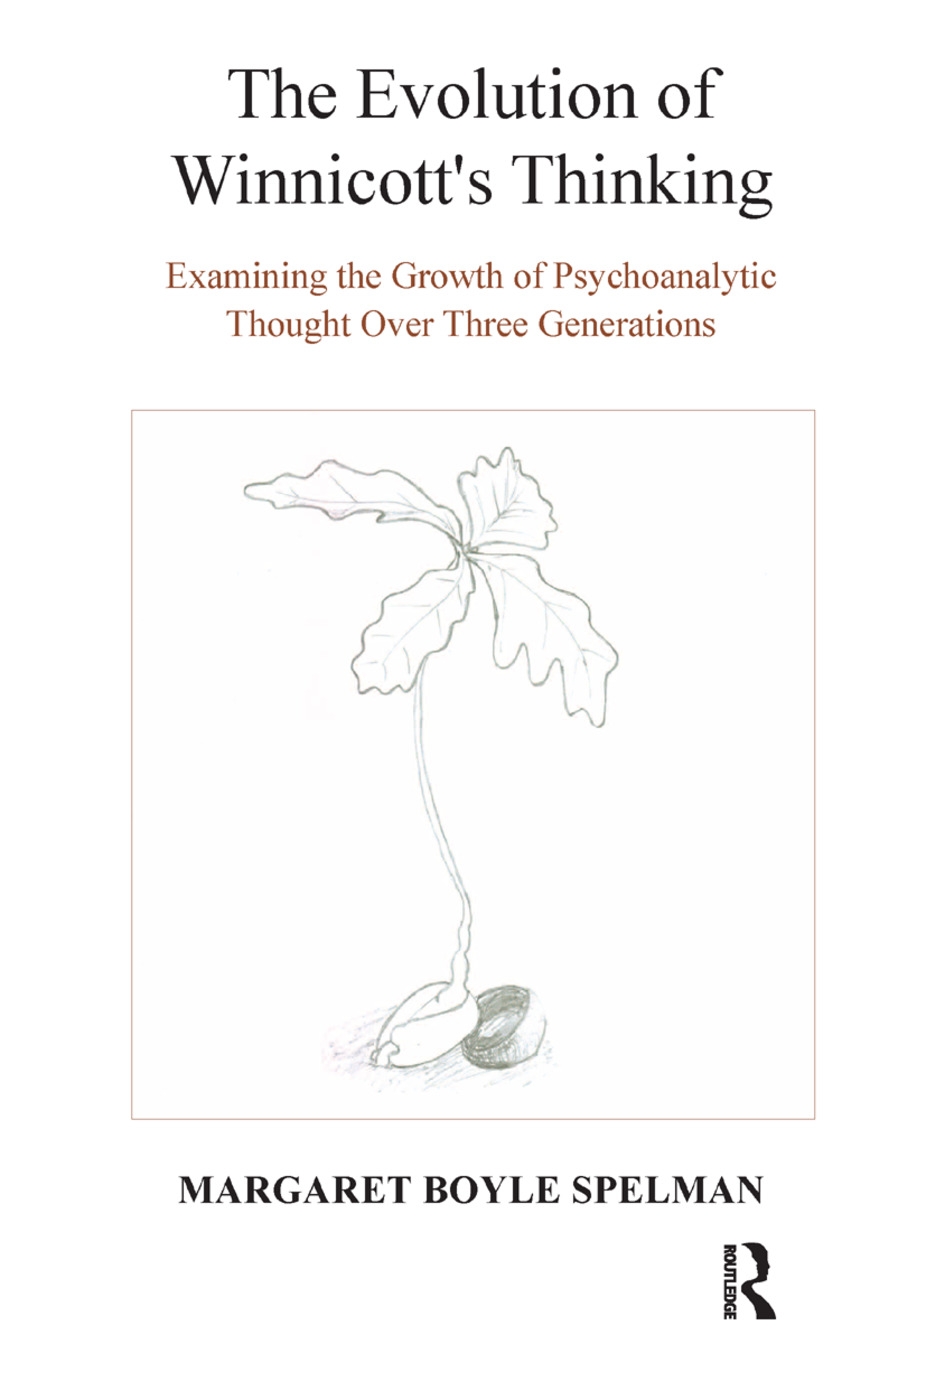 The Evolution of Winnicott’s Thinking: Examining the Growth of Psychoanalytic Thought over Three Generations